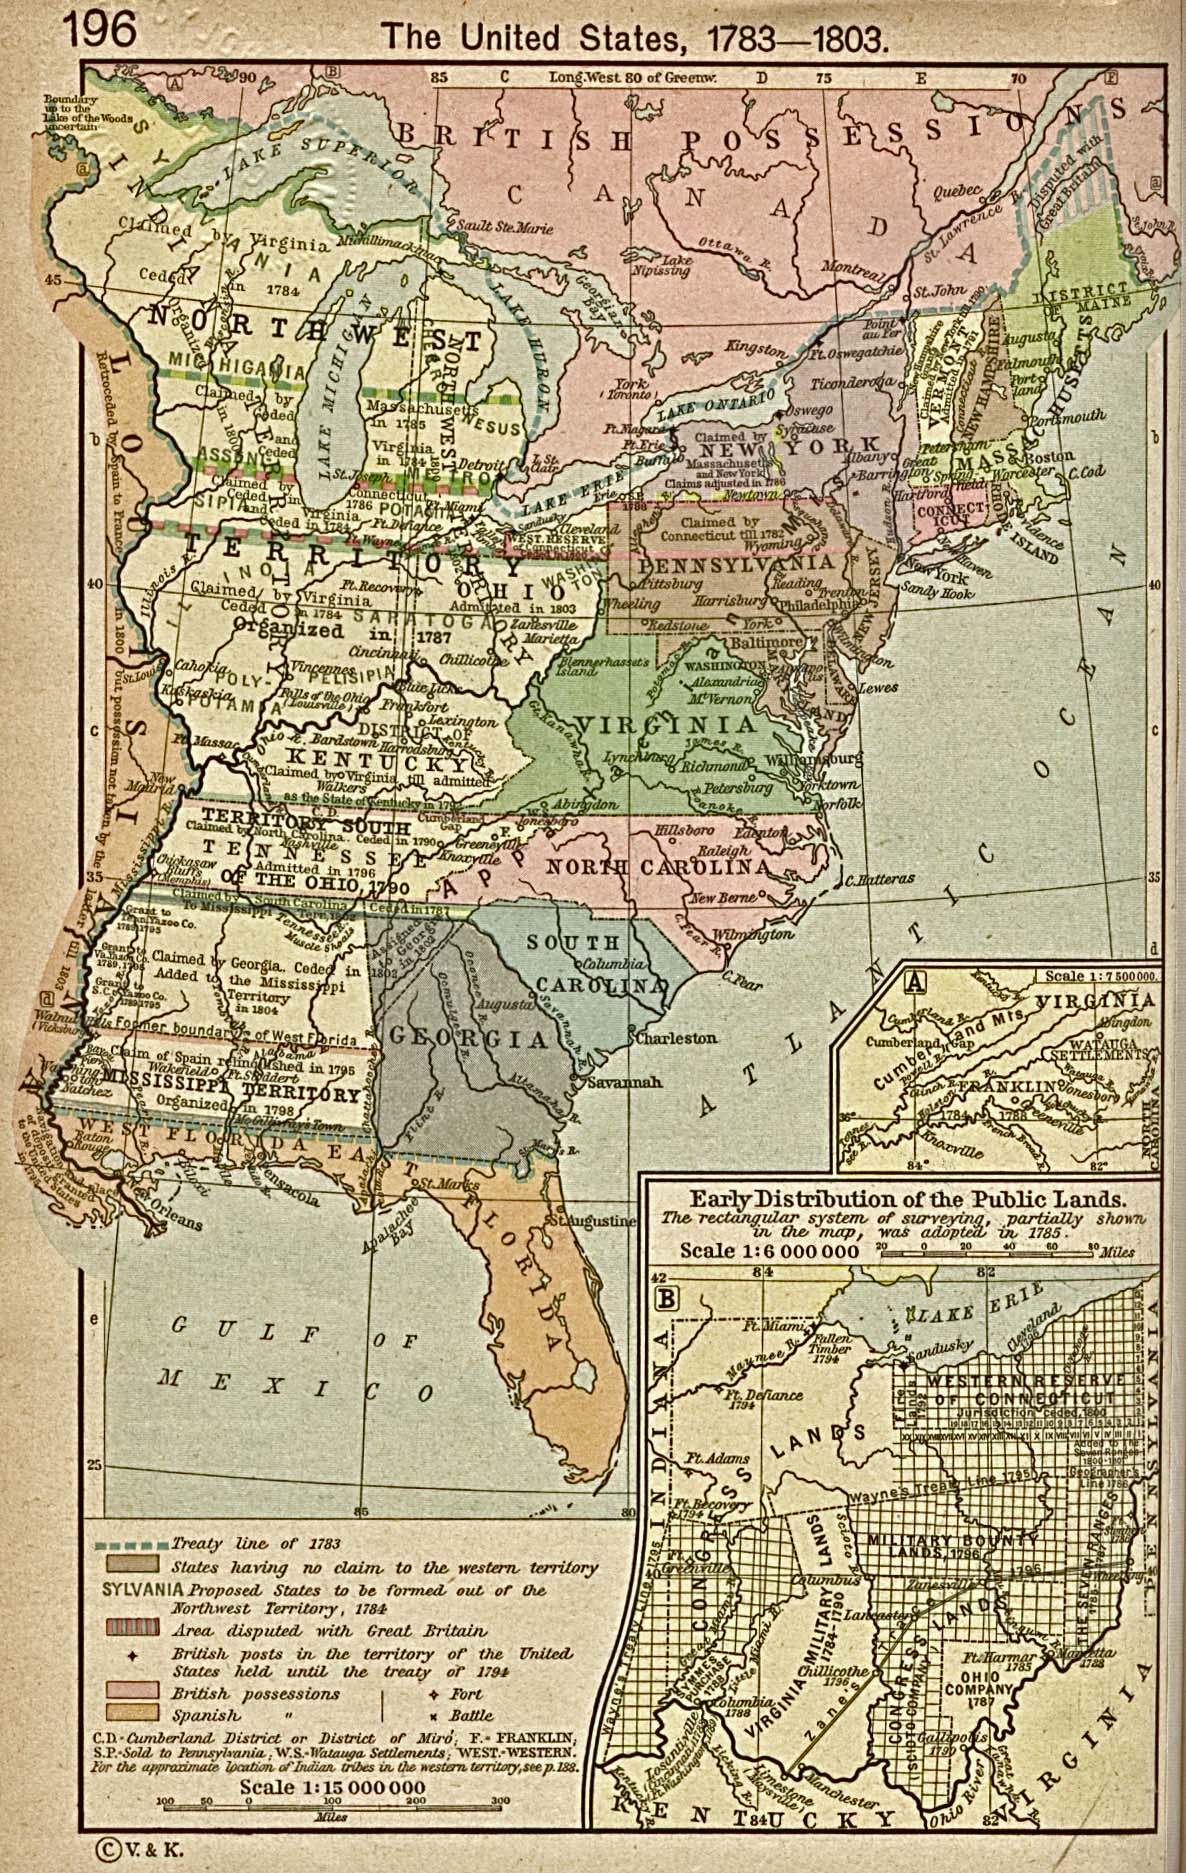 This map shows the United States as it existed between 1783 and 1803, with the State of Franklin in an inset.